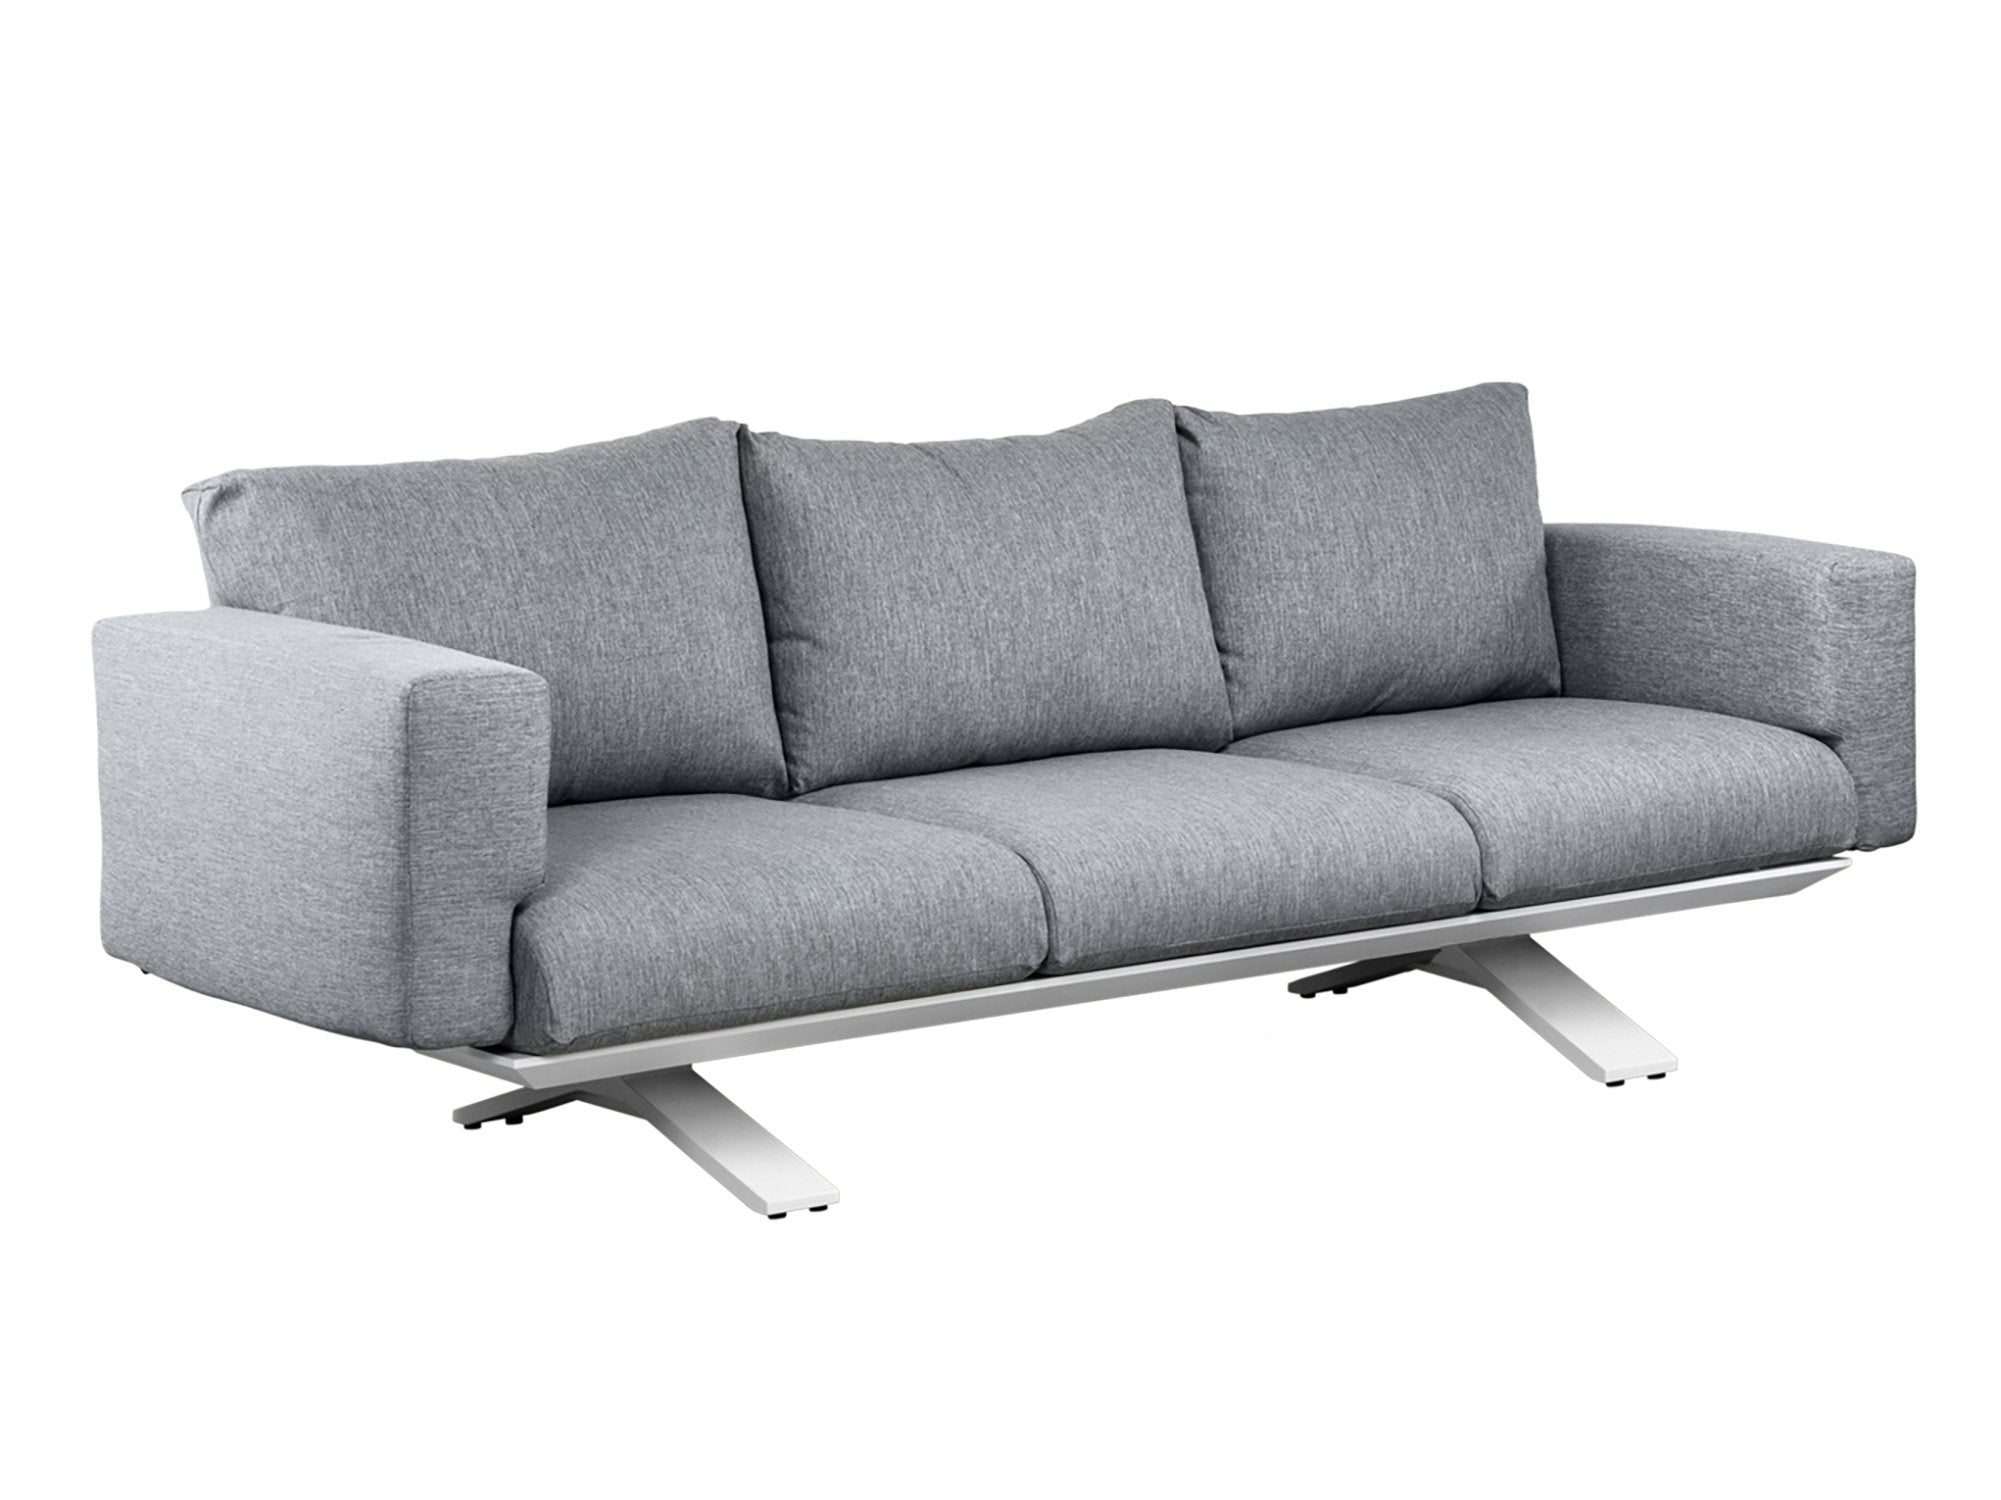 Stockholm Outdoor 3-Seater Sofa